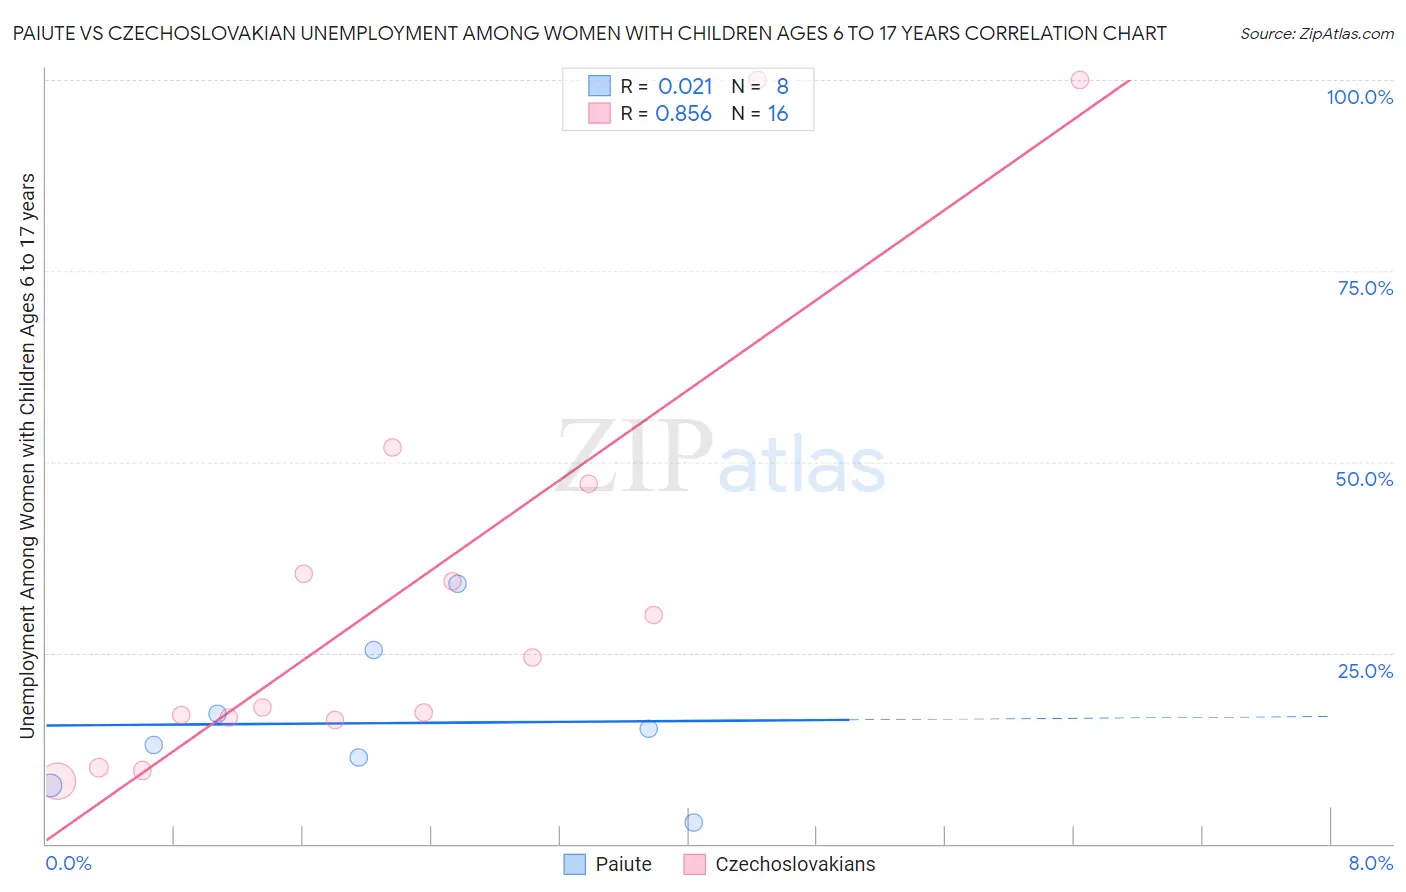 Paiute vs Czechoslovakian Unemployment Among Women with Children Ages 6 to 17 years